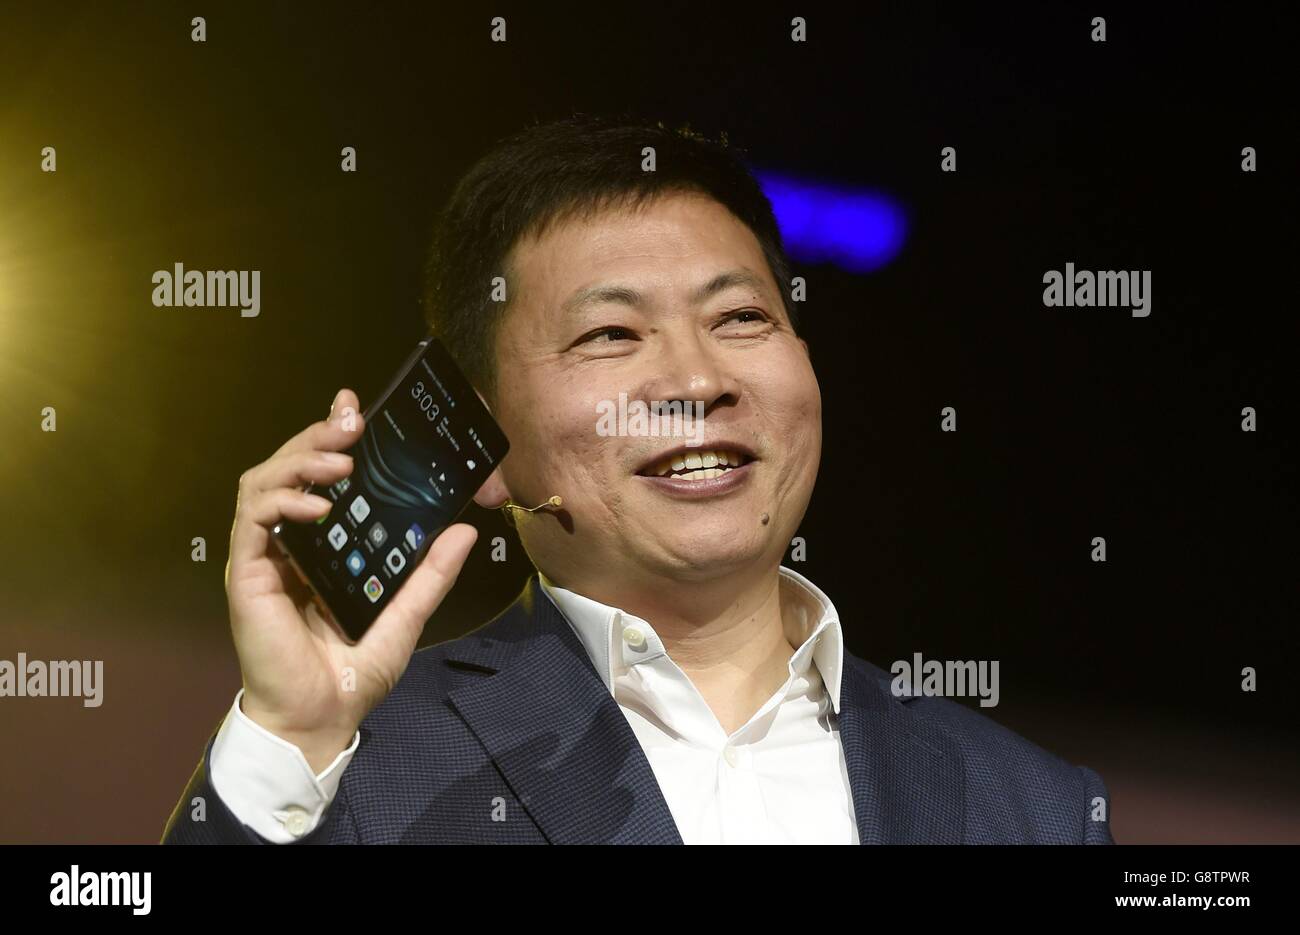 Mr. Yu Chengdong (Richard Yu) CEO of Huawei Technologies Consumer Business Group at the Huawei product announcement of their P9 and P9 plus smartphones at Battersea Evolution in London. Stock Photo